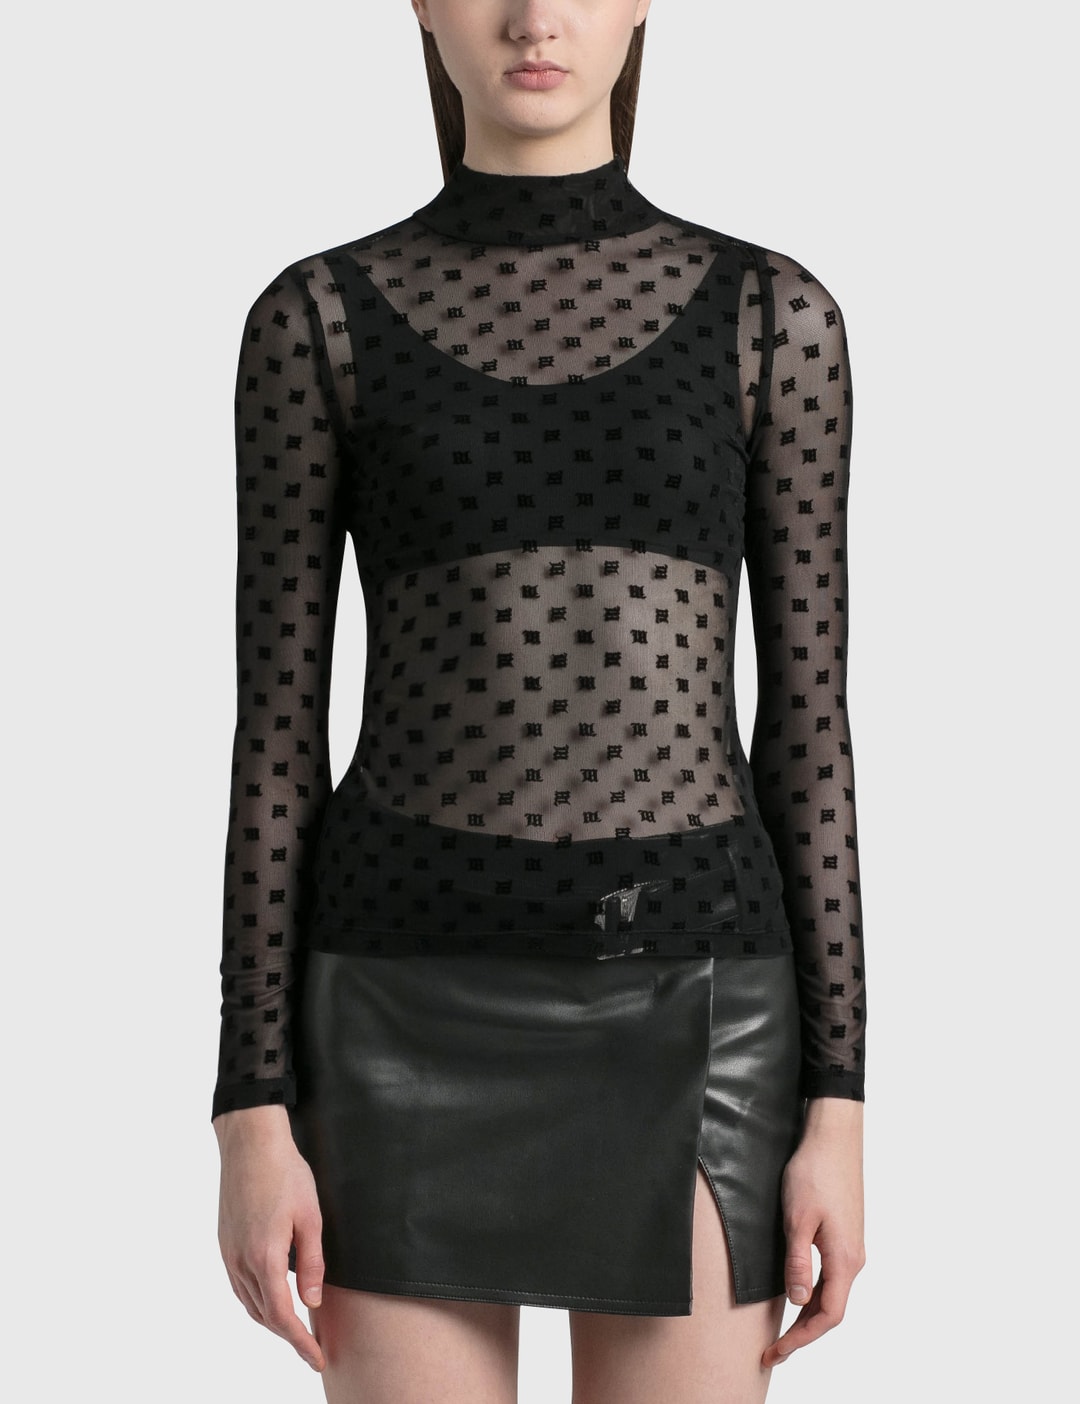 Misbhv - Monogram Mesh Turtleneck | HBX - Globally Curated Fashion and ...